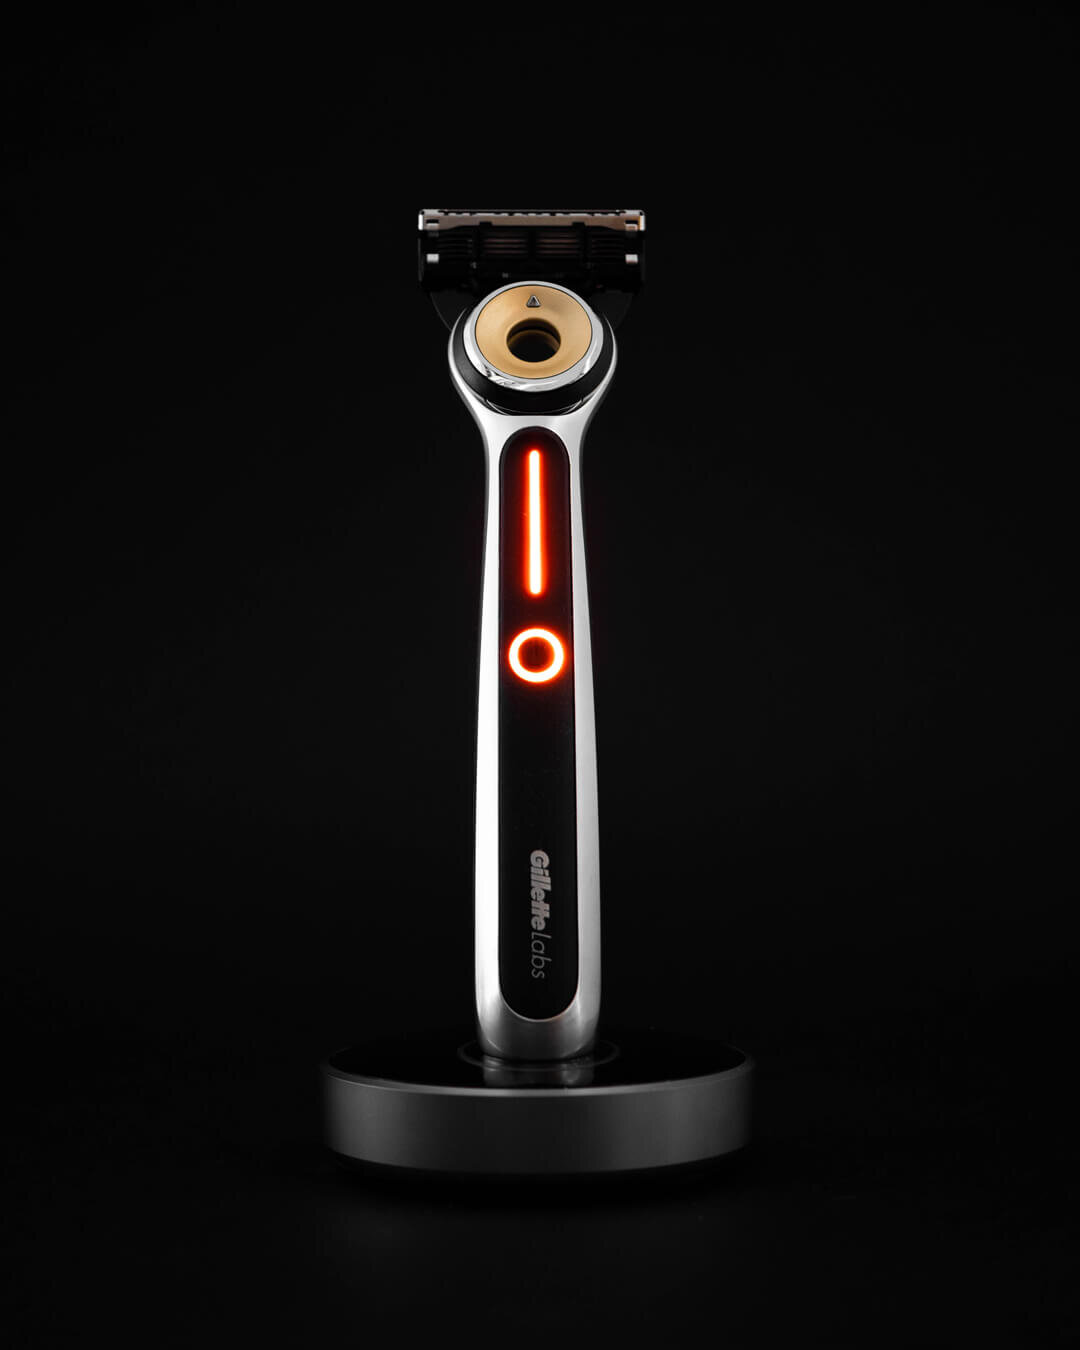 GilletteLabs-Heated-Razor-Product-Photography-captured-in-a-studio.jpg